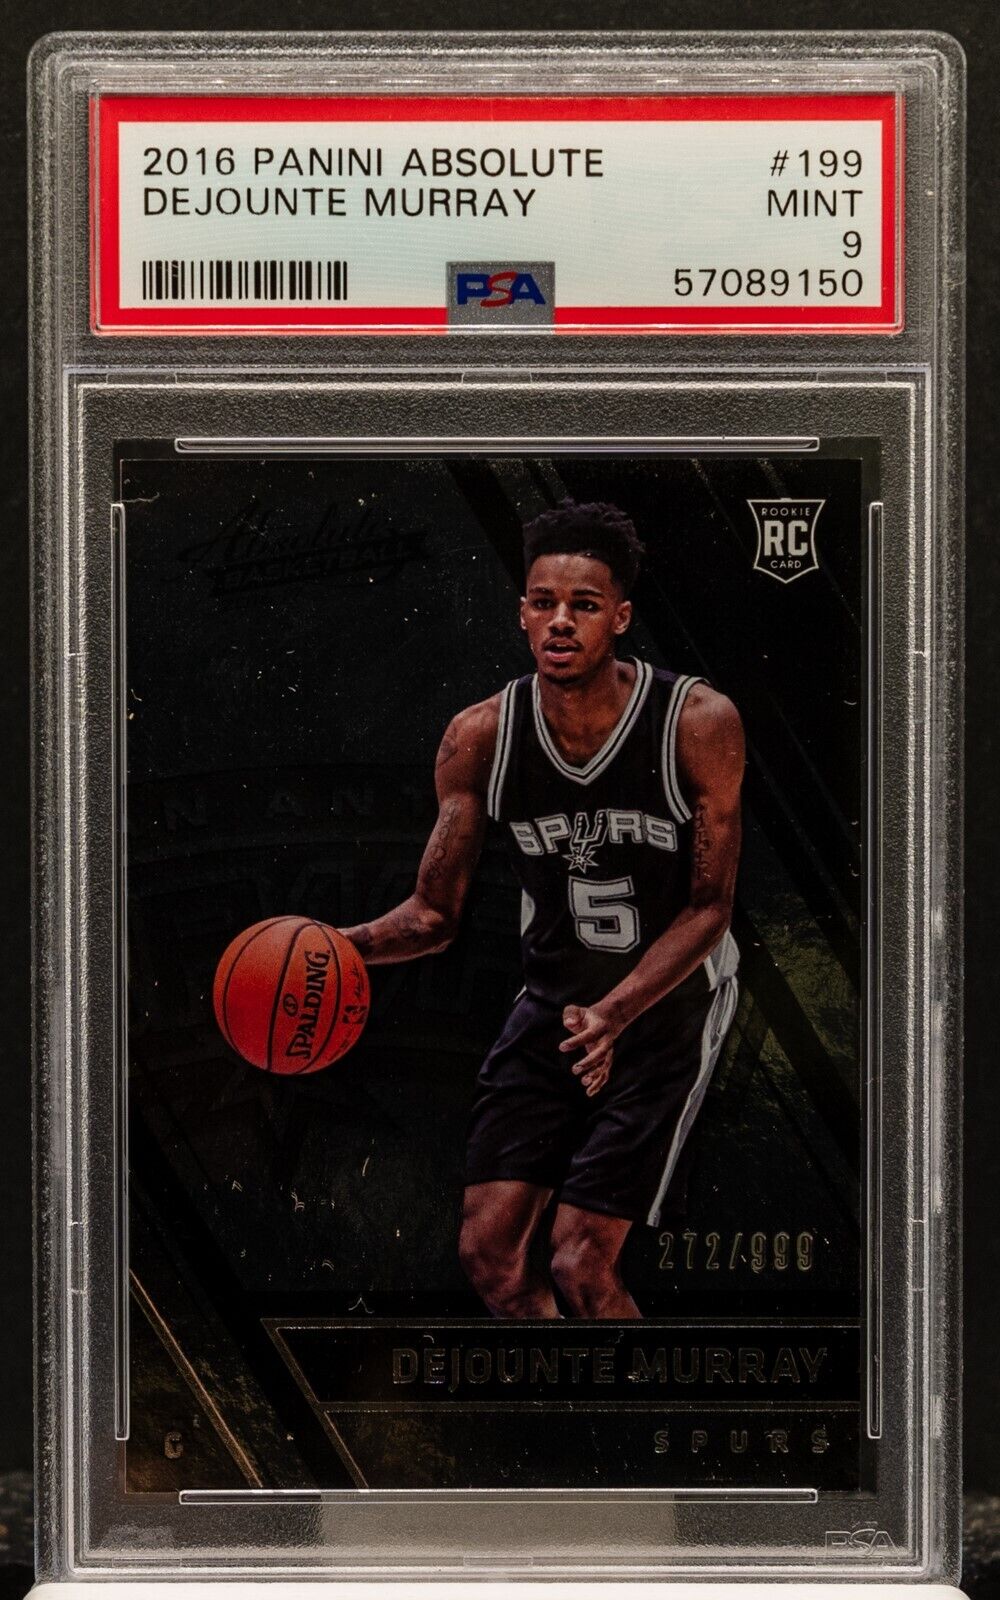 57089150 Dejounte Murray 2016 Panini Absolute Rookie RC 272/999 PSA 9 MINT